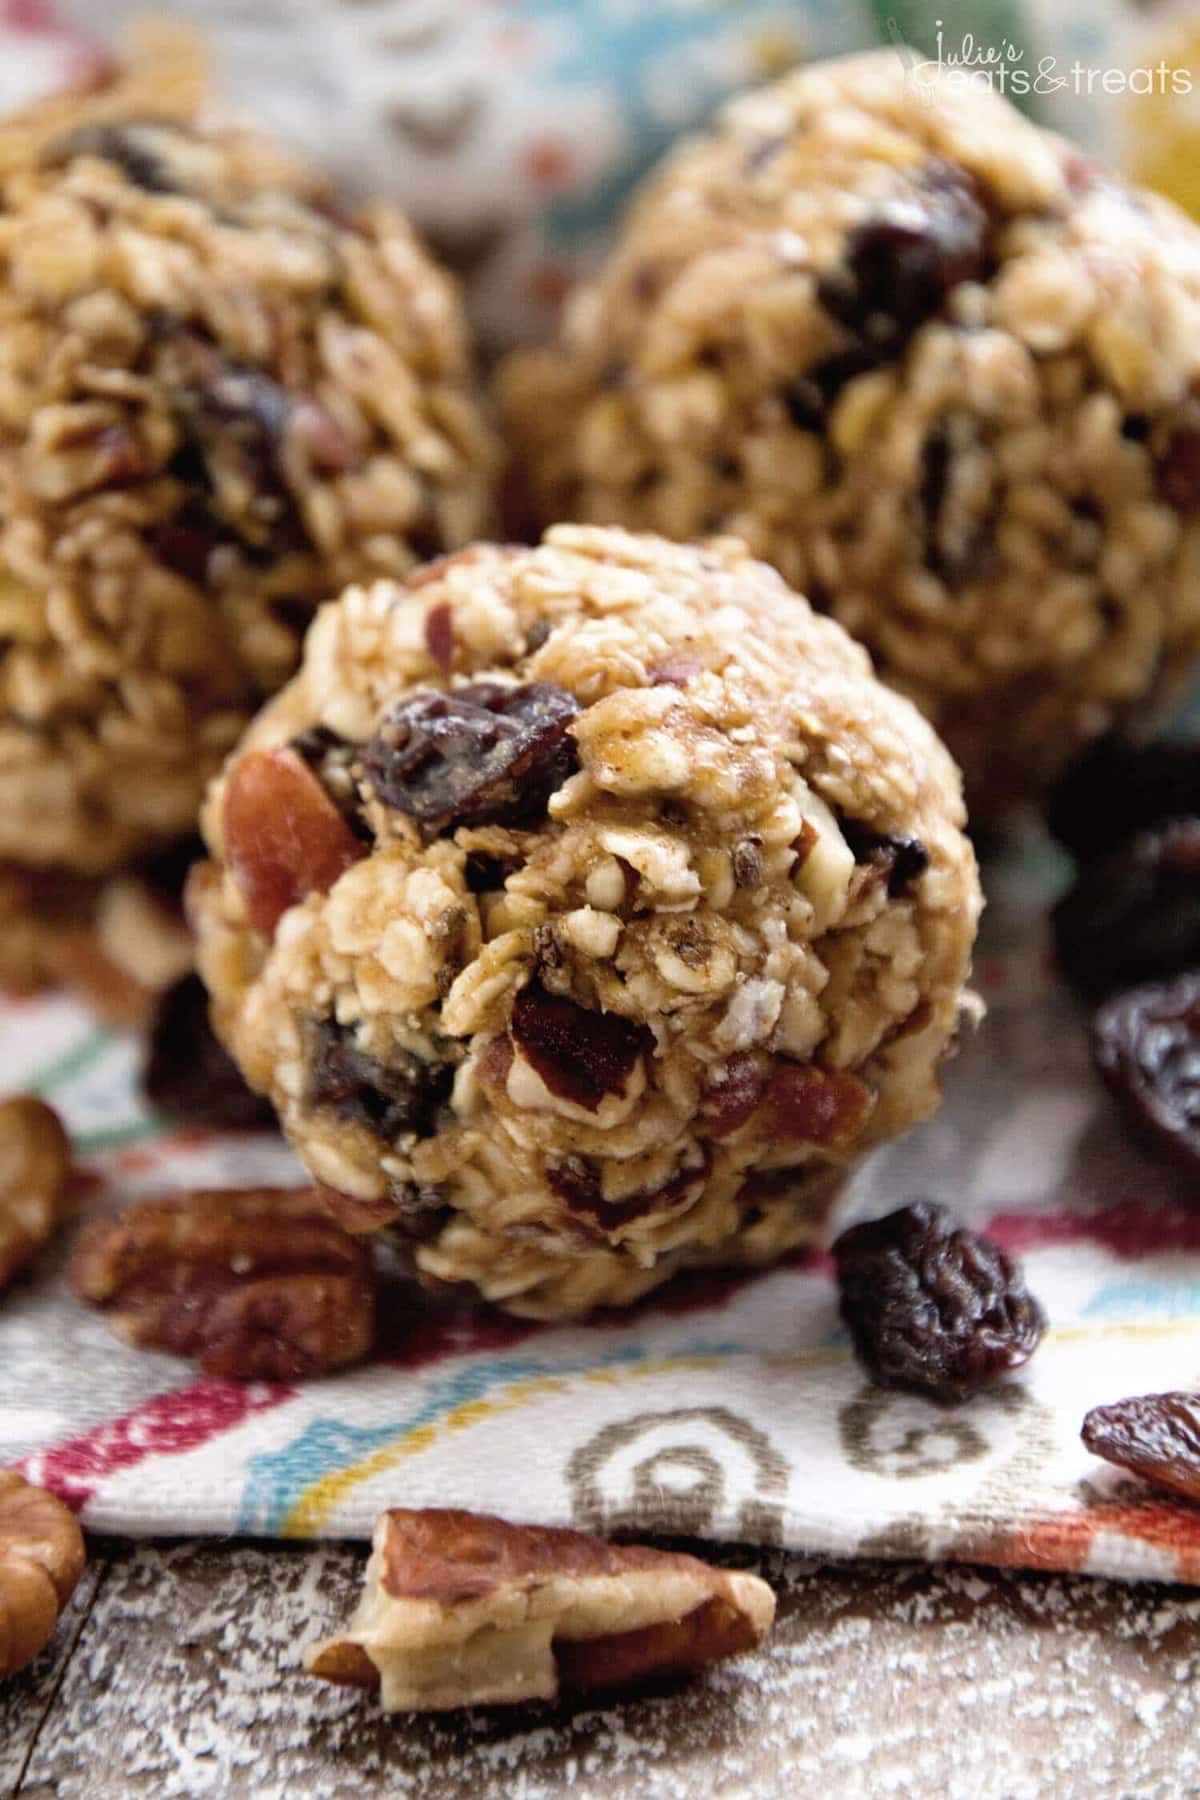 No Bake Oatmeal Raisin Energy Balls Recipe ~ Delicious Energy Balls That Taste Just like Oatmeal Raisin Cookies! Loaded with Oatmeal, Raisins, Pecans, Flaxseed, Chia Seeds and Spiced with Cinnamon!